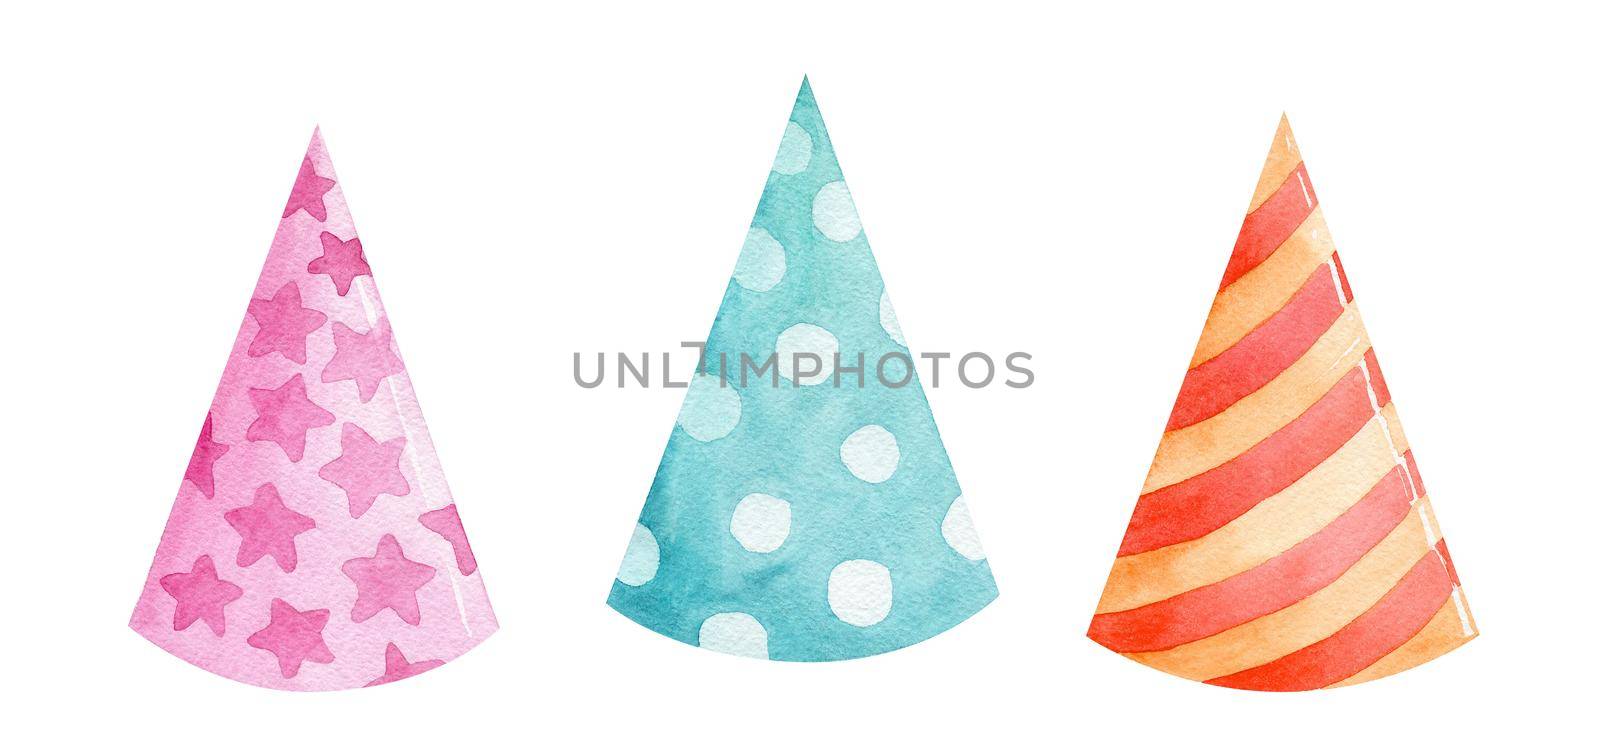 watercolor color party hats set isolated on white background. Birthday cones with stripes and dots accessories clip art for invitations and designs by dreamloud